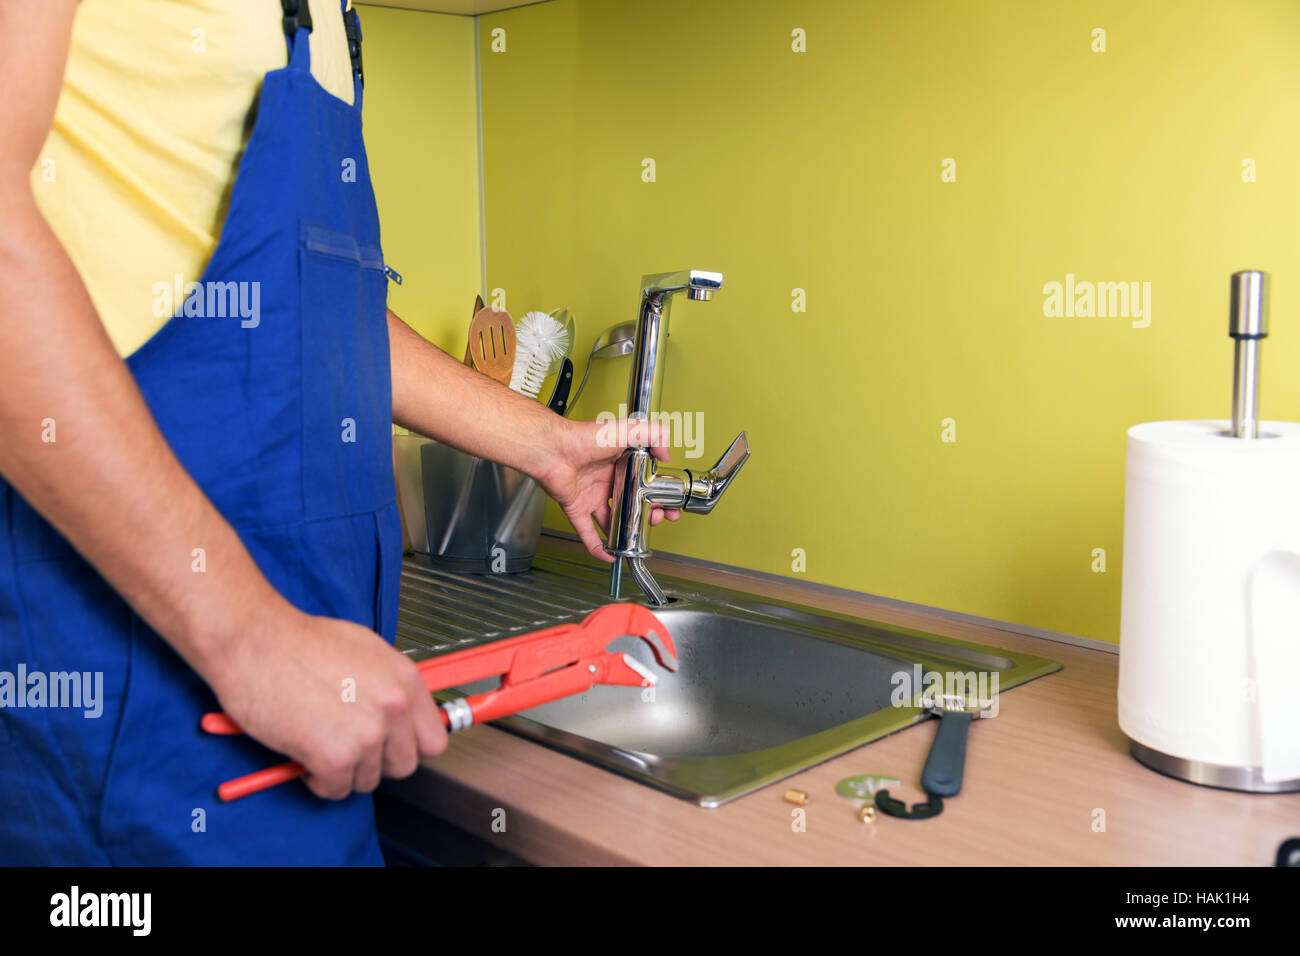 plumbing, disassembled kitchen faucet and mounting accessories Stock Photo  - Alamy